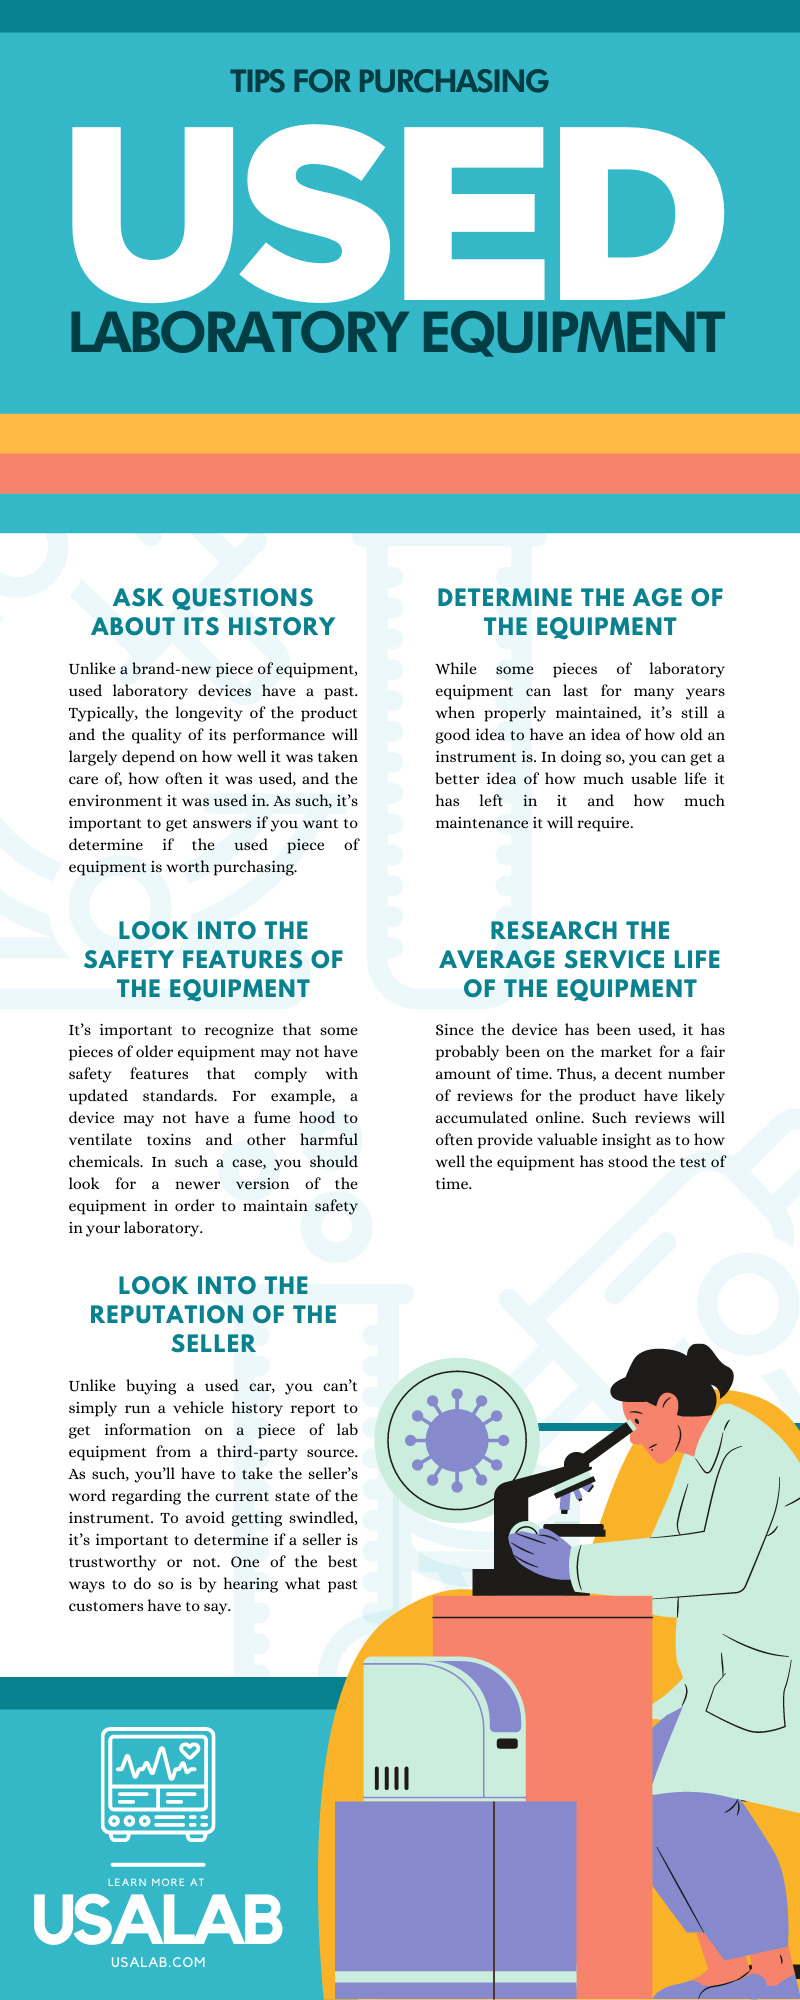 A Guide to Selling Used Lab Equipment